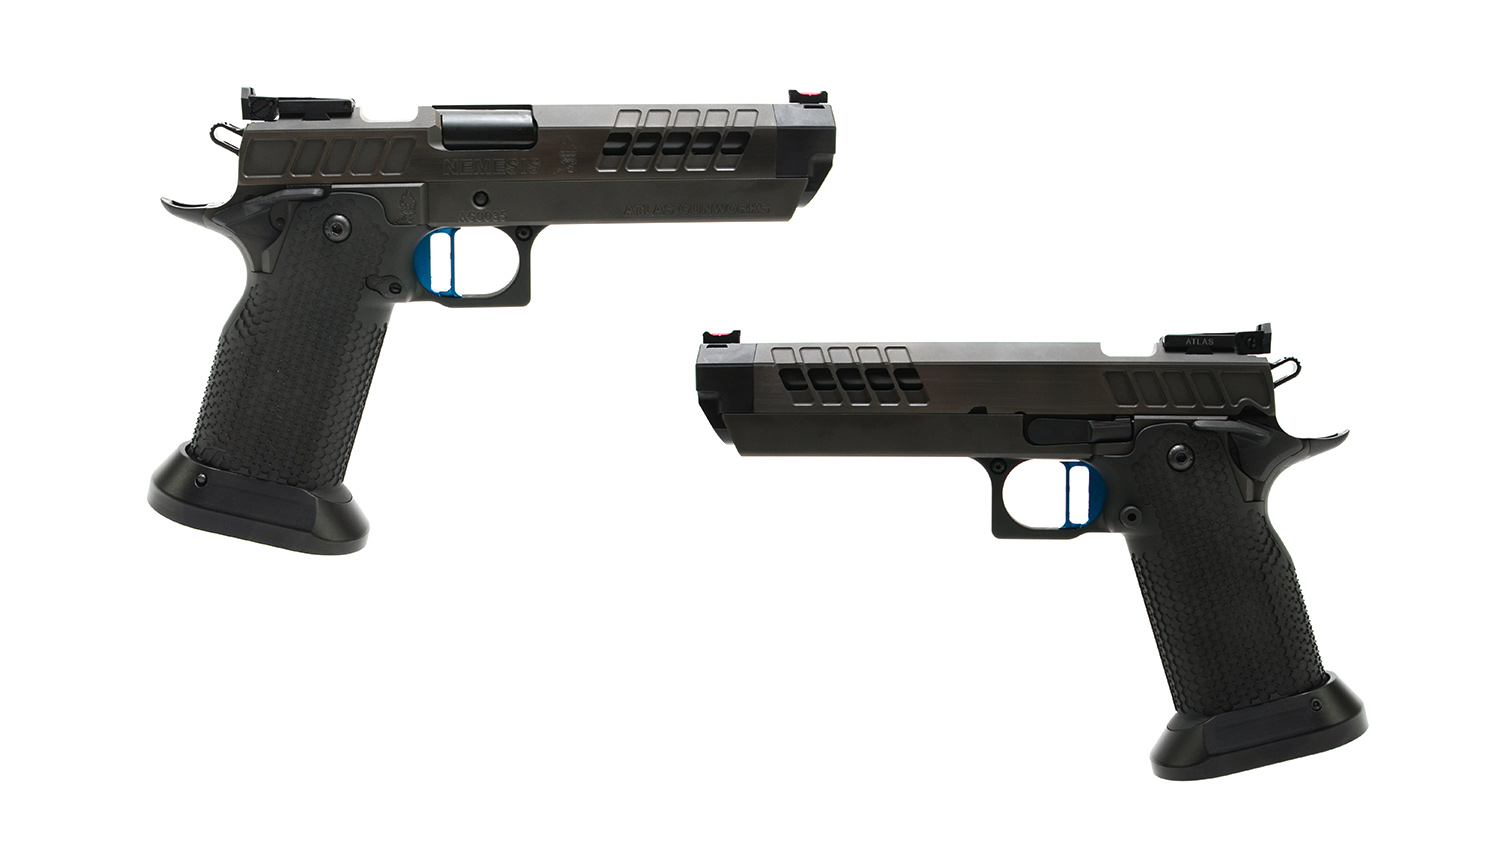 Atlas Nemesis for USPSA Limited shooters